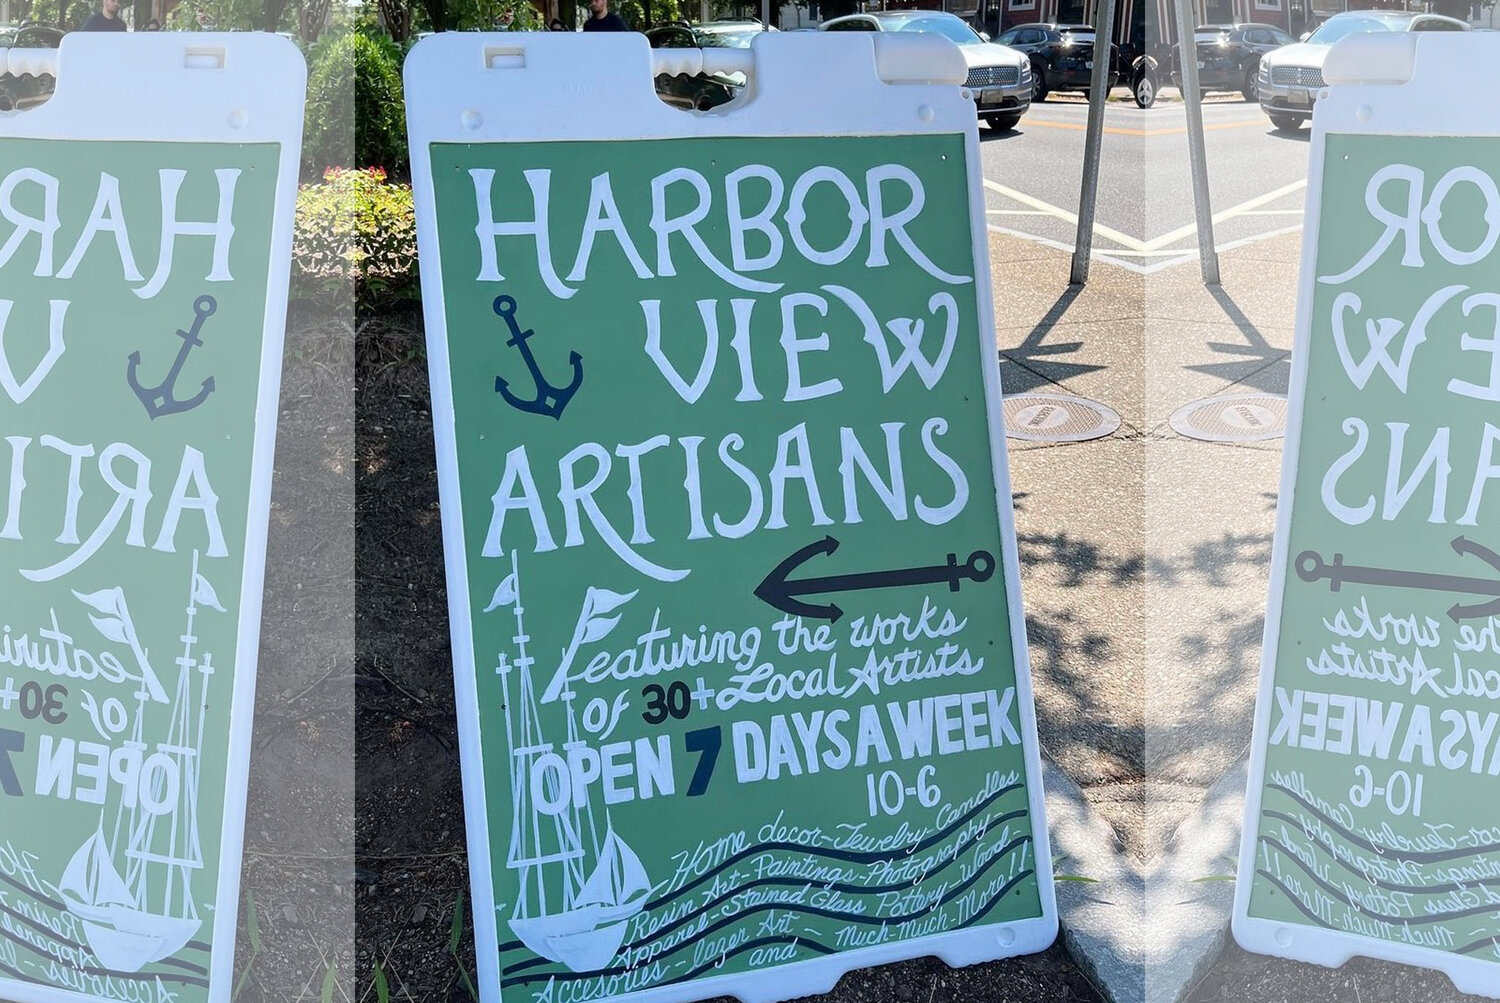 Harbor View Artisans sells wares from across RI